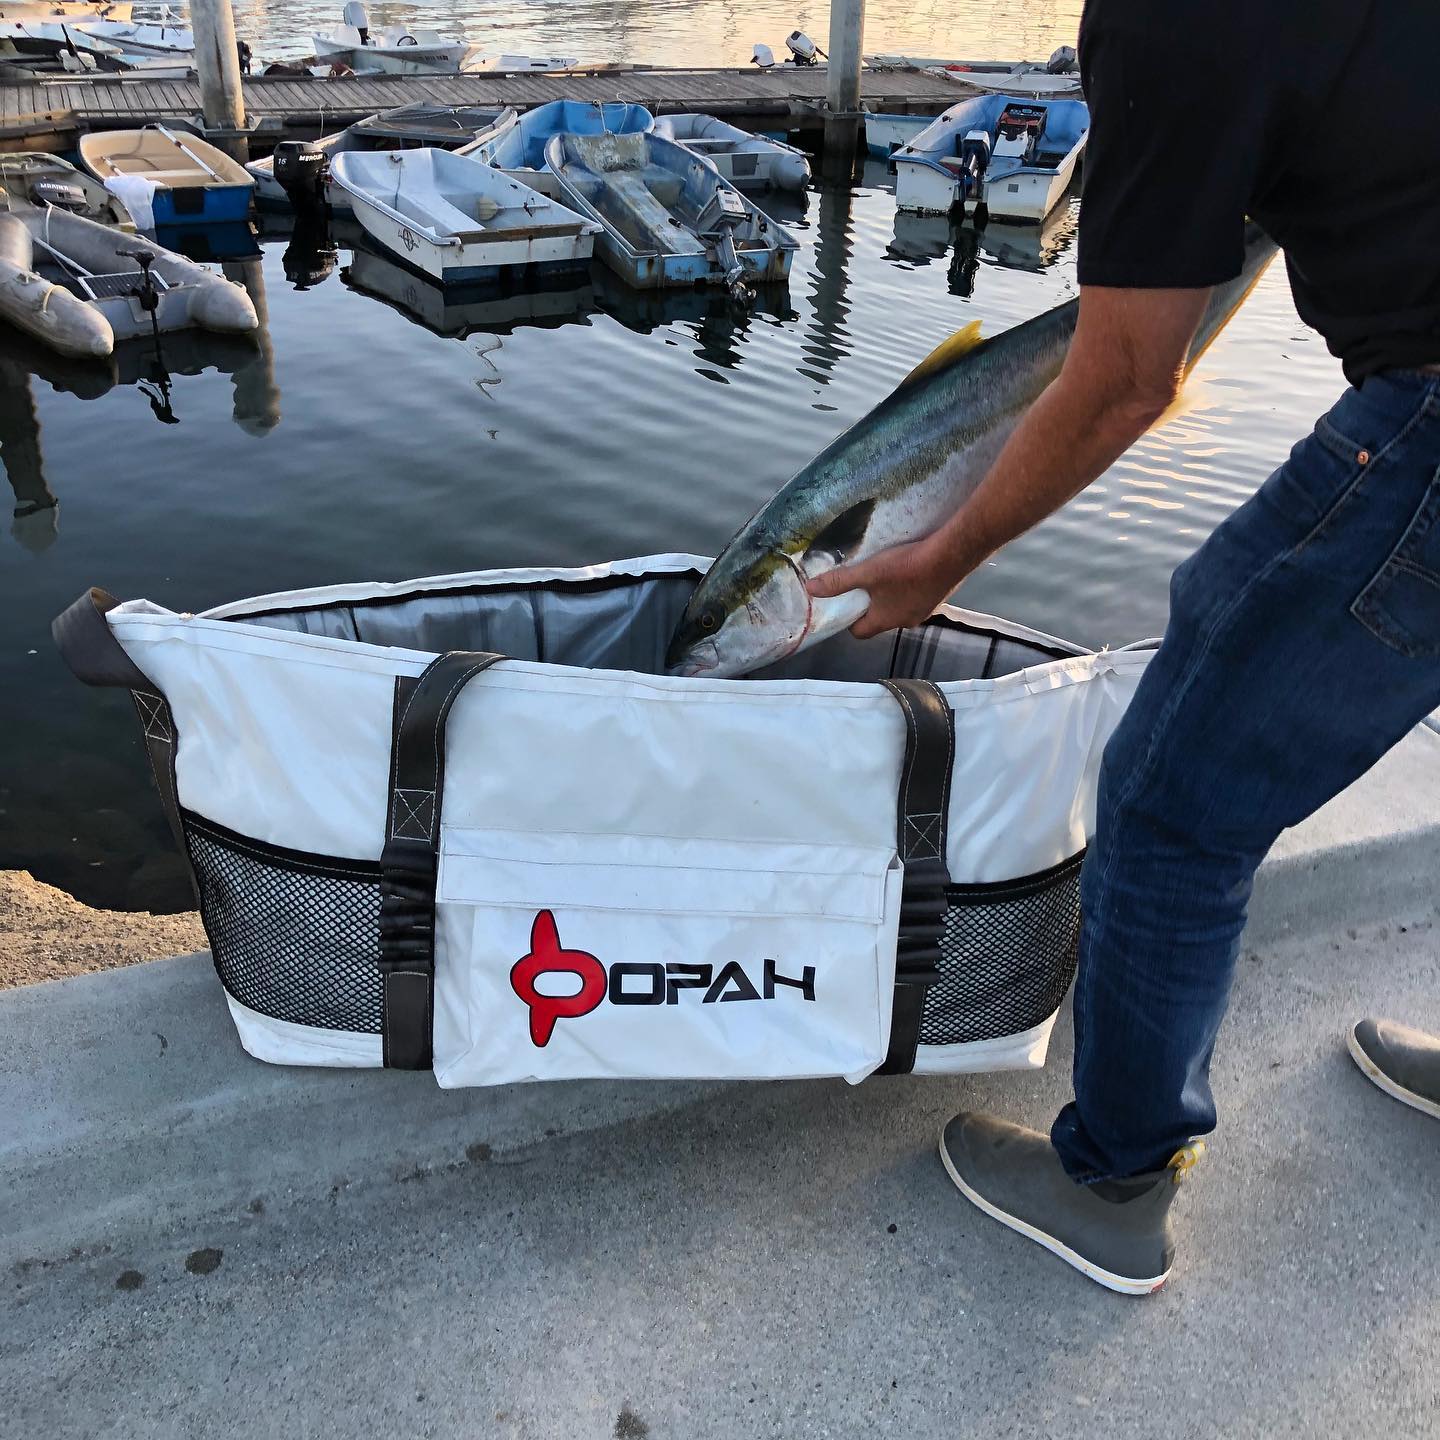 Opah Gear Fathom 4 Fish Cooler Bag Kill Bag. Protect your catch longer. The most reliable fish bag on the market. Purposely built to be the highest quality fish cooler bag in sportfishing. Even great when used as an insulated cooler bag while out camping or for other normal use. The highest quality insulated bag. A perfect Tuna Kill Bag, Dorado Kill bag, or yellowtail kill bag. 